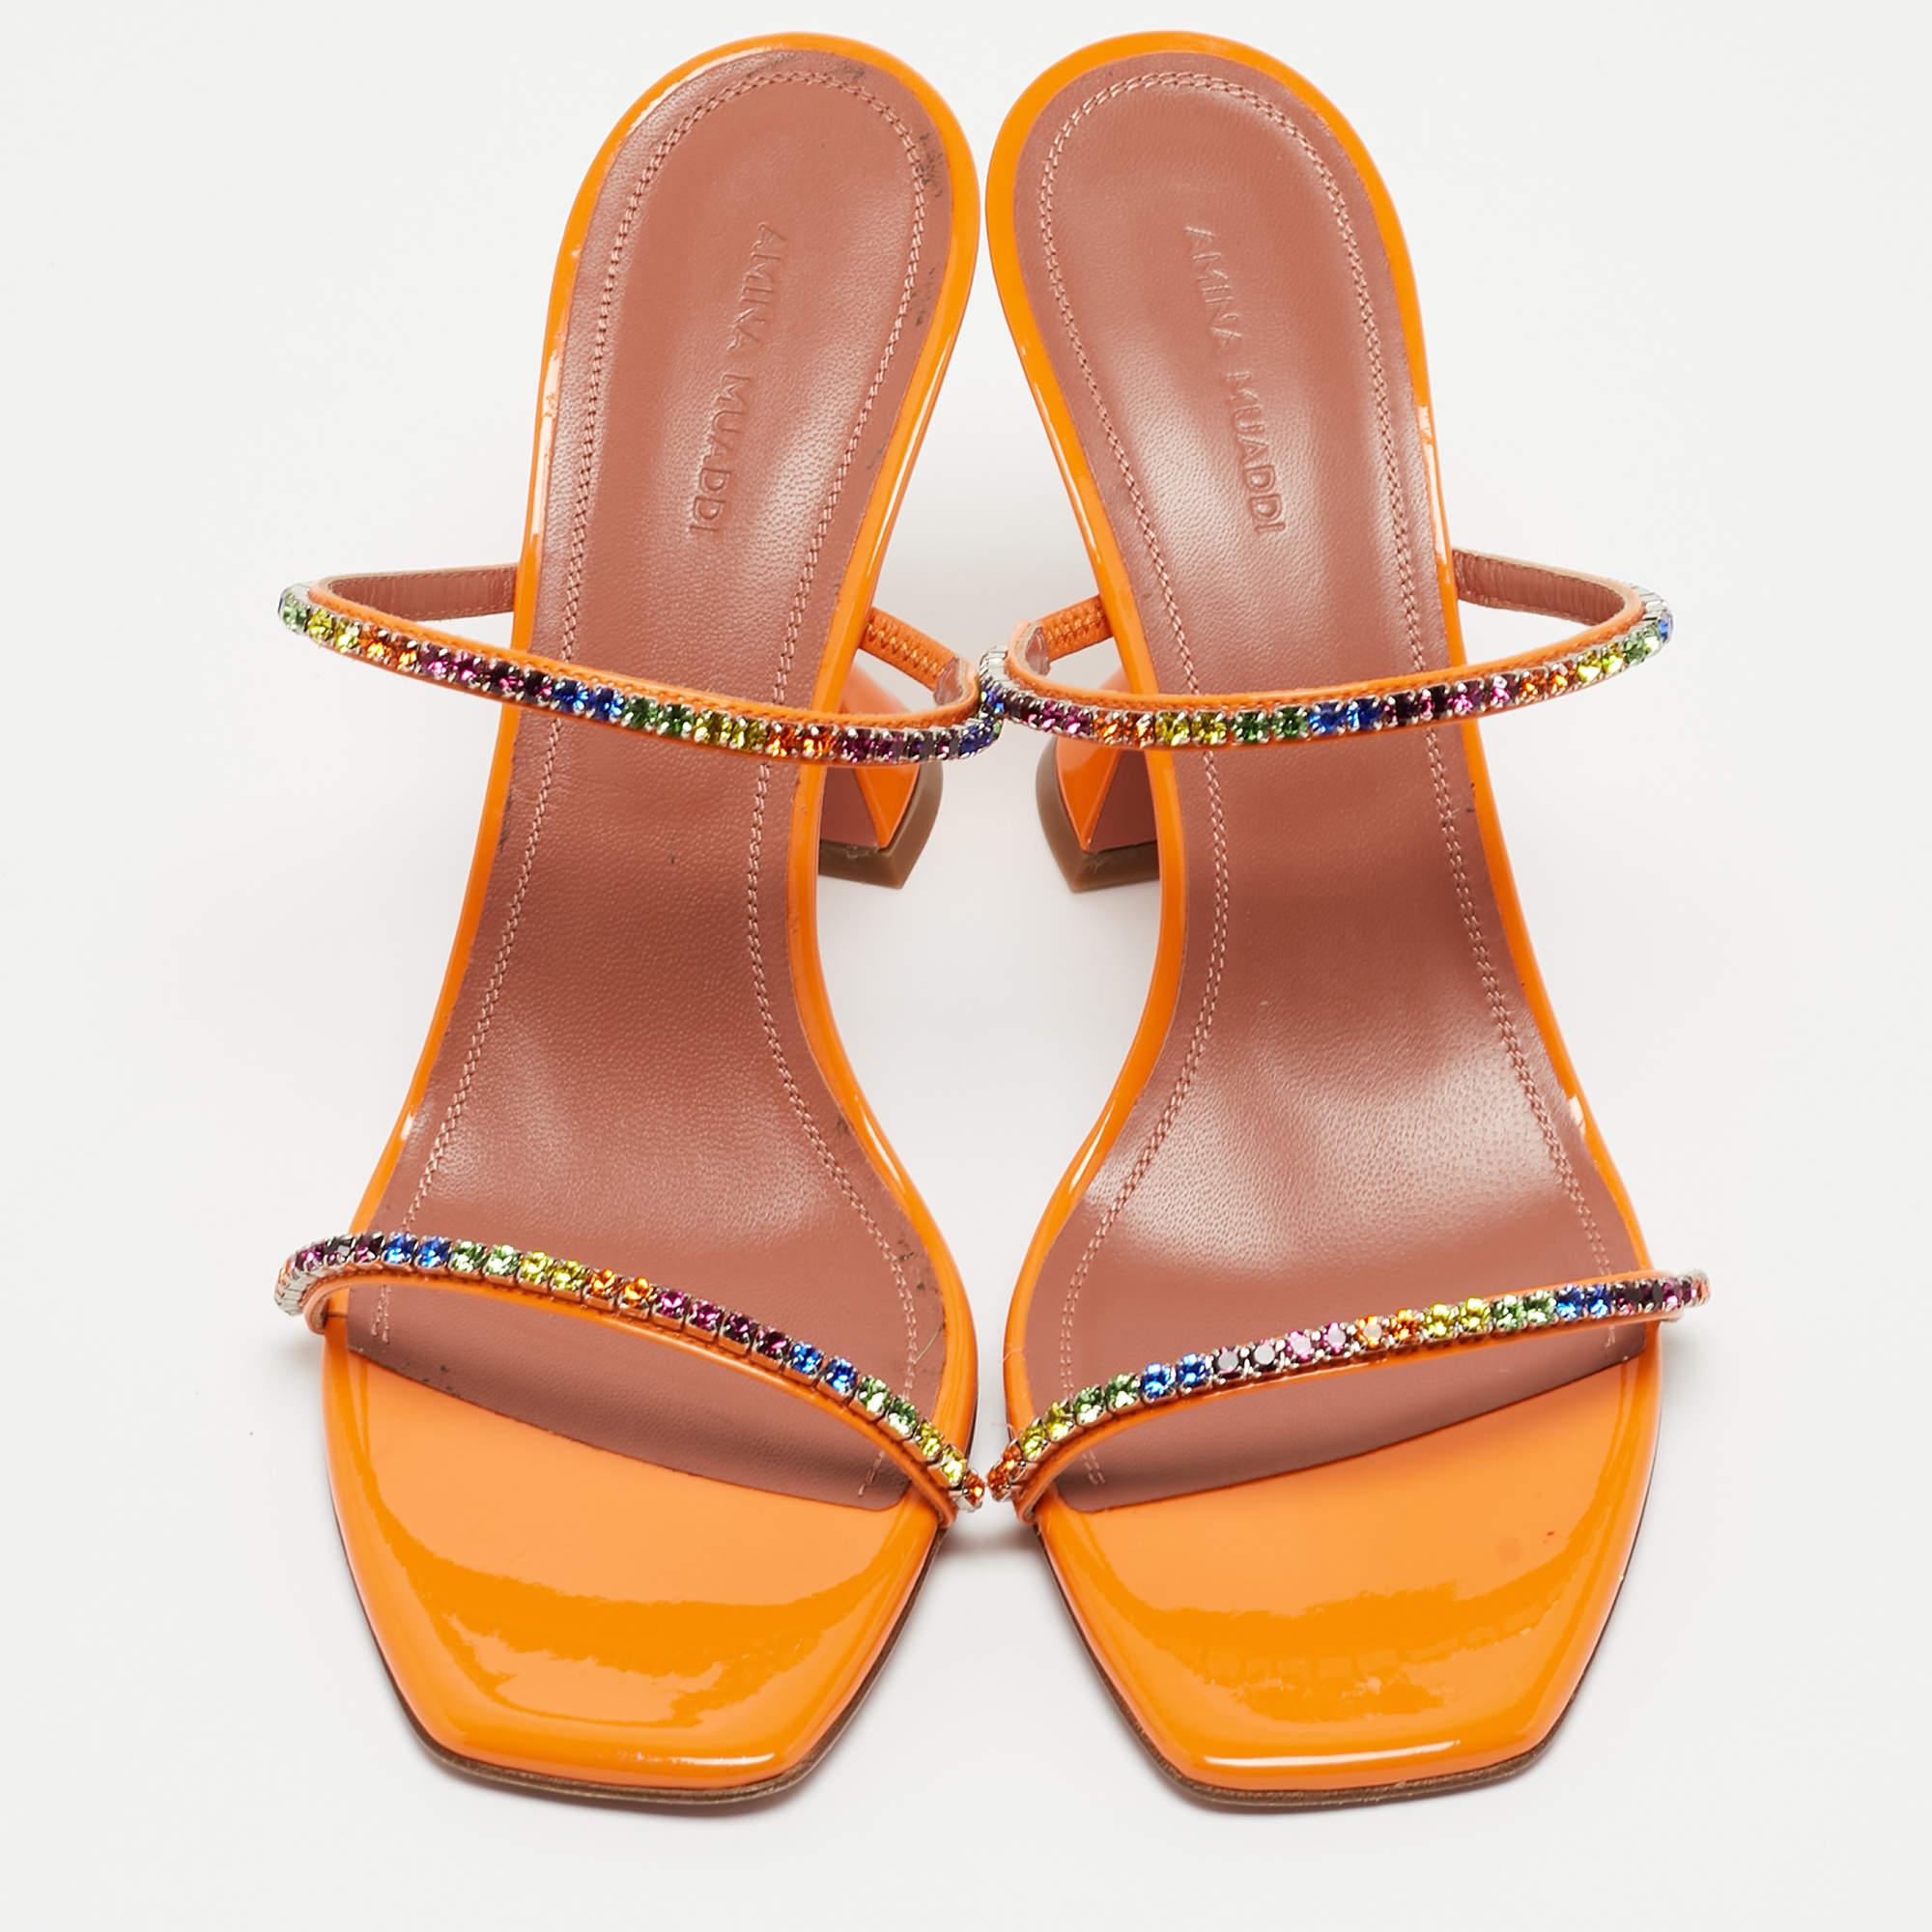 Step into the world of luxury and comfort with these Amina Muaddi sandals. Detailed with two embellished straps and signature heels, these slides will add a glam finish.

Includes: Original Dustbag, Original Box

